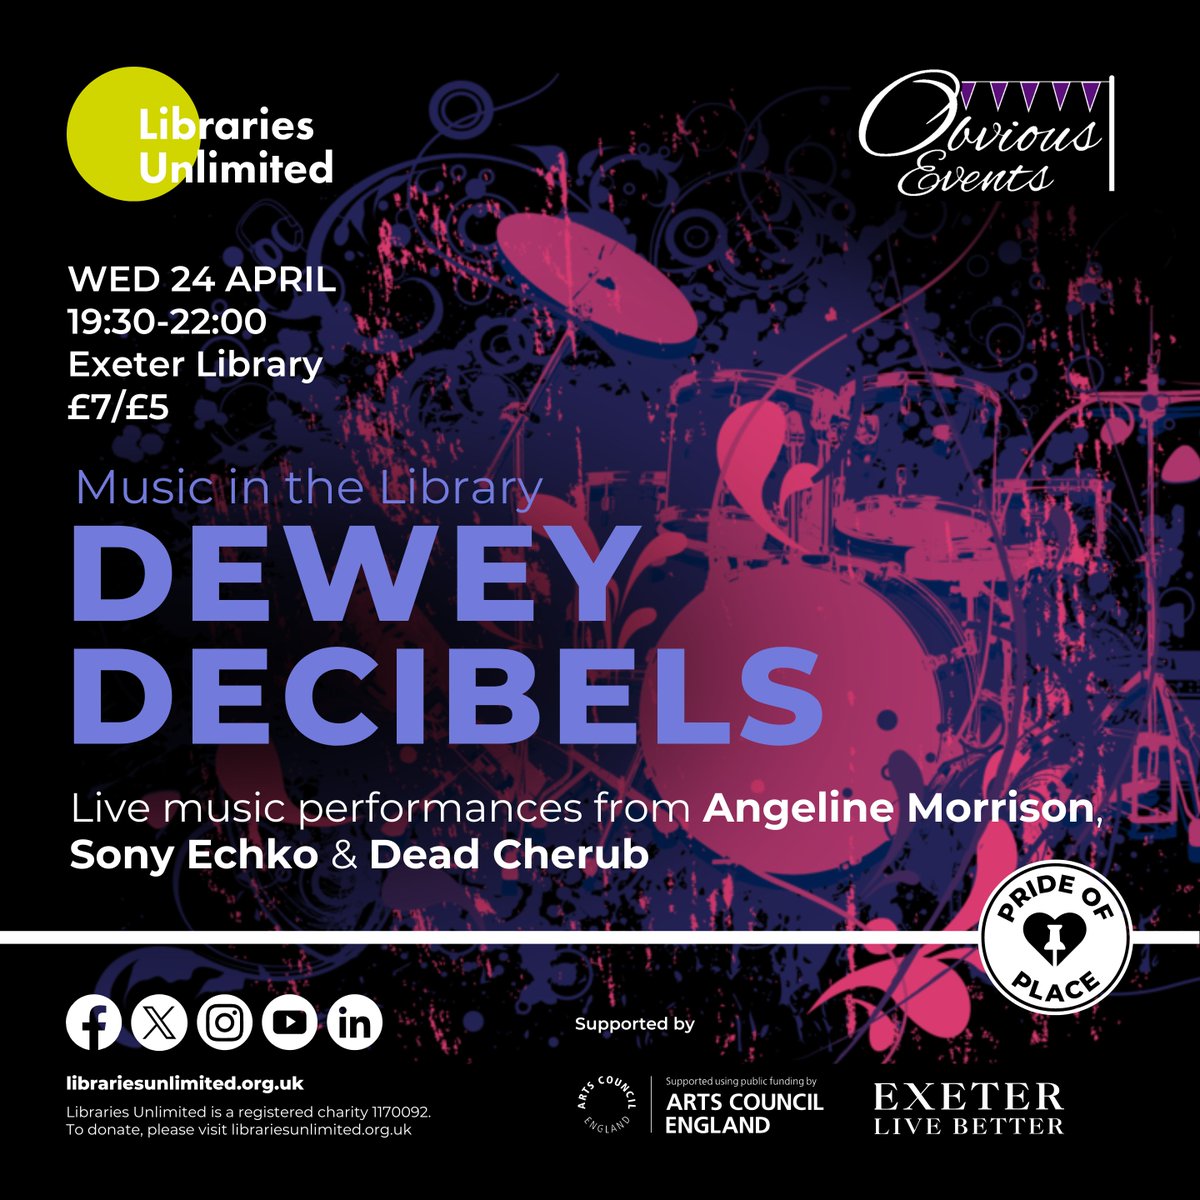 Dewey Decibels, a night of new and eclectic music @ExeterLibrary! The evening will feature sets from folk artist Angeline Morrison, ethereal R&B artist SonyEchko and local indie rock pop band Dead Cherub. Tickets bit.ly/3xCvC8c #MusicInTheLibrary #LibrariesUnlimited